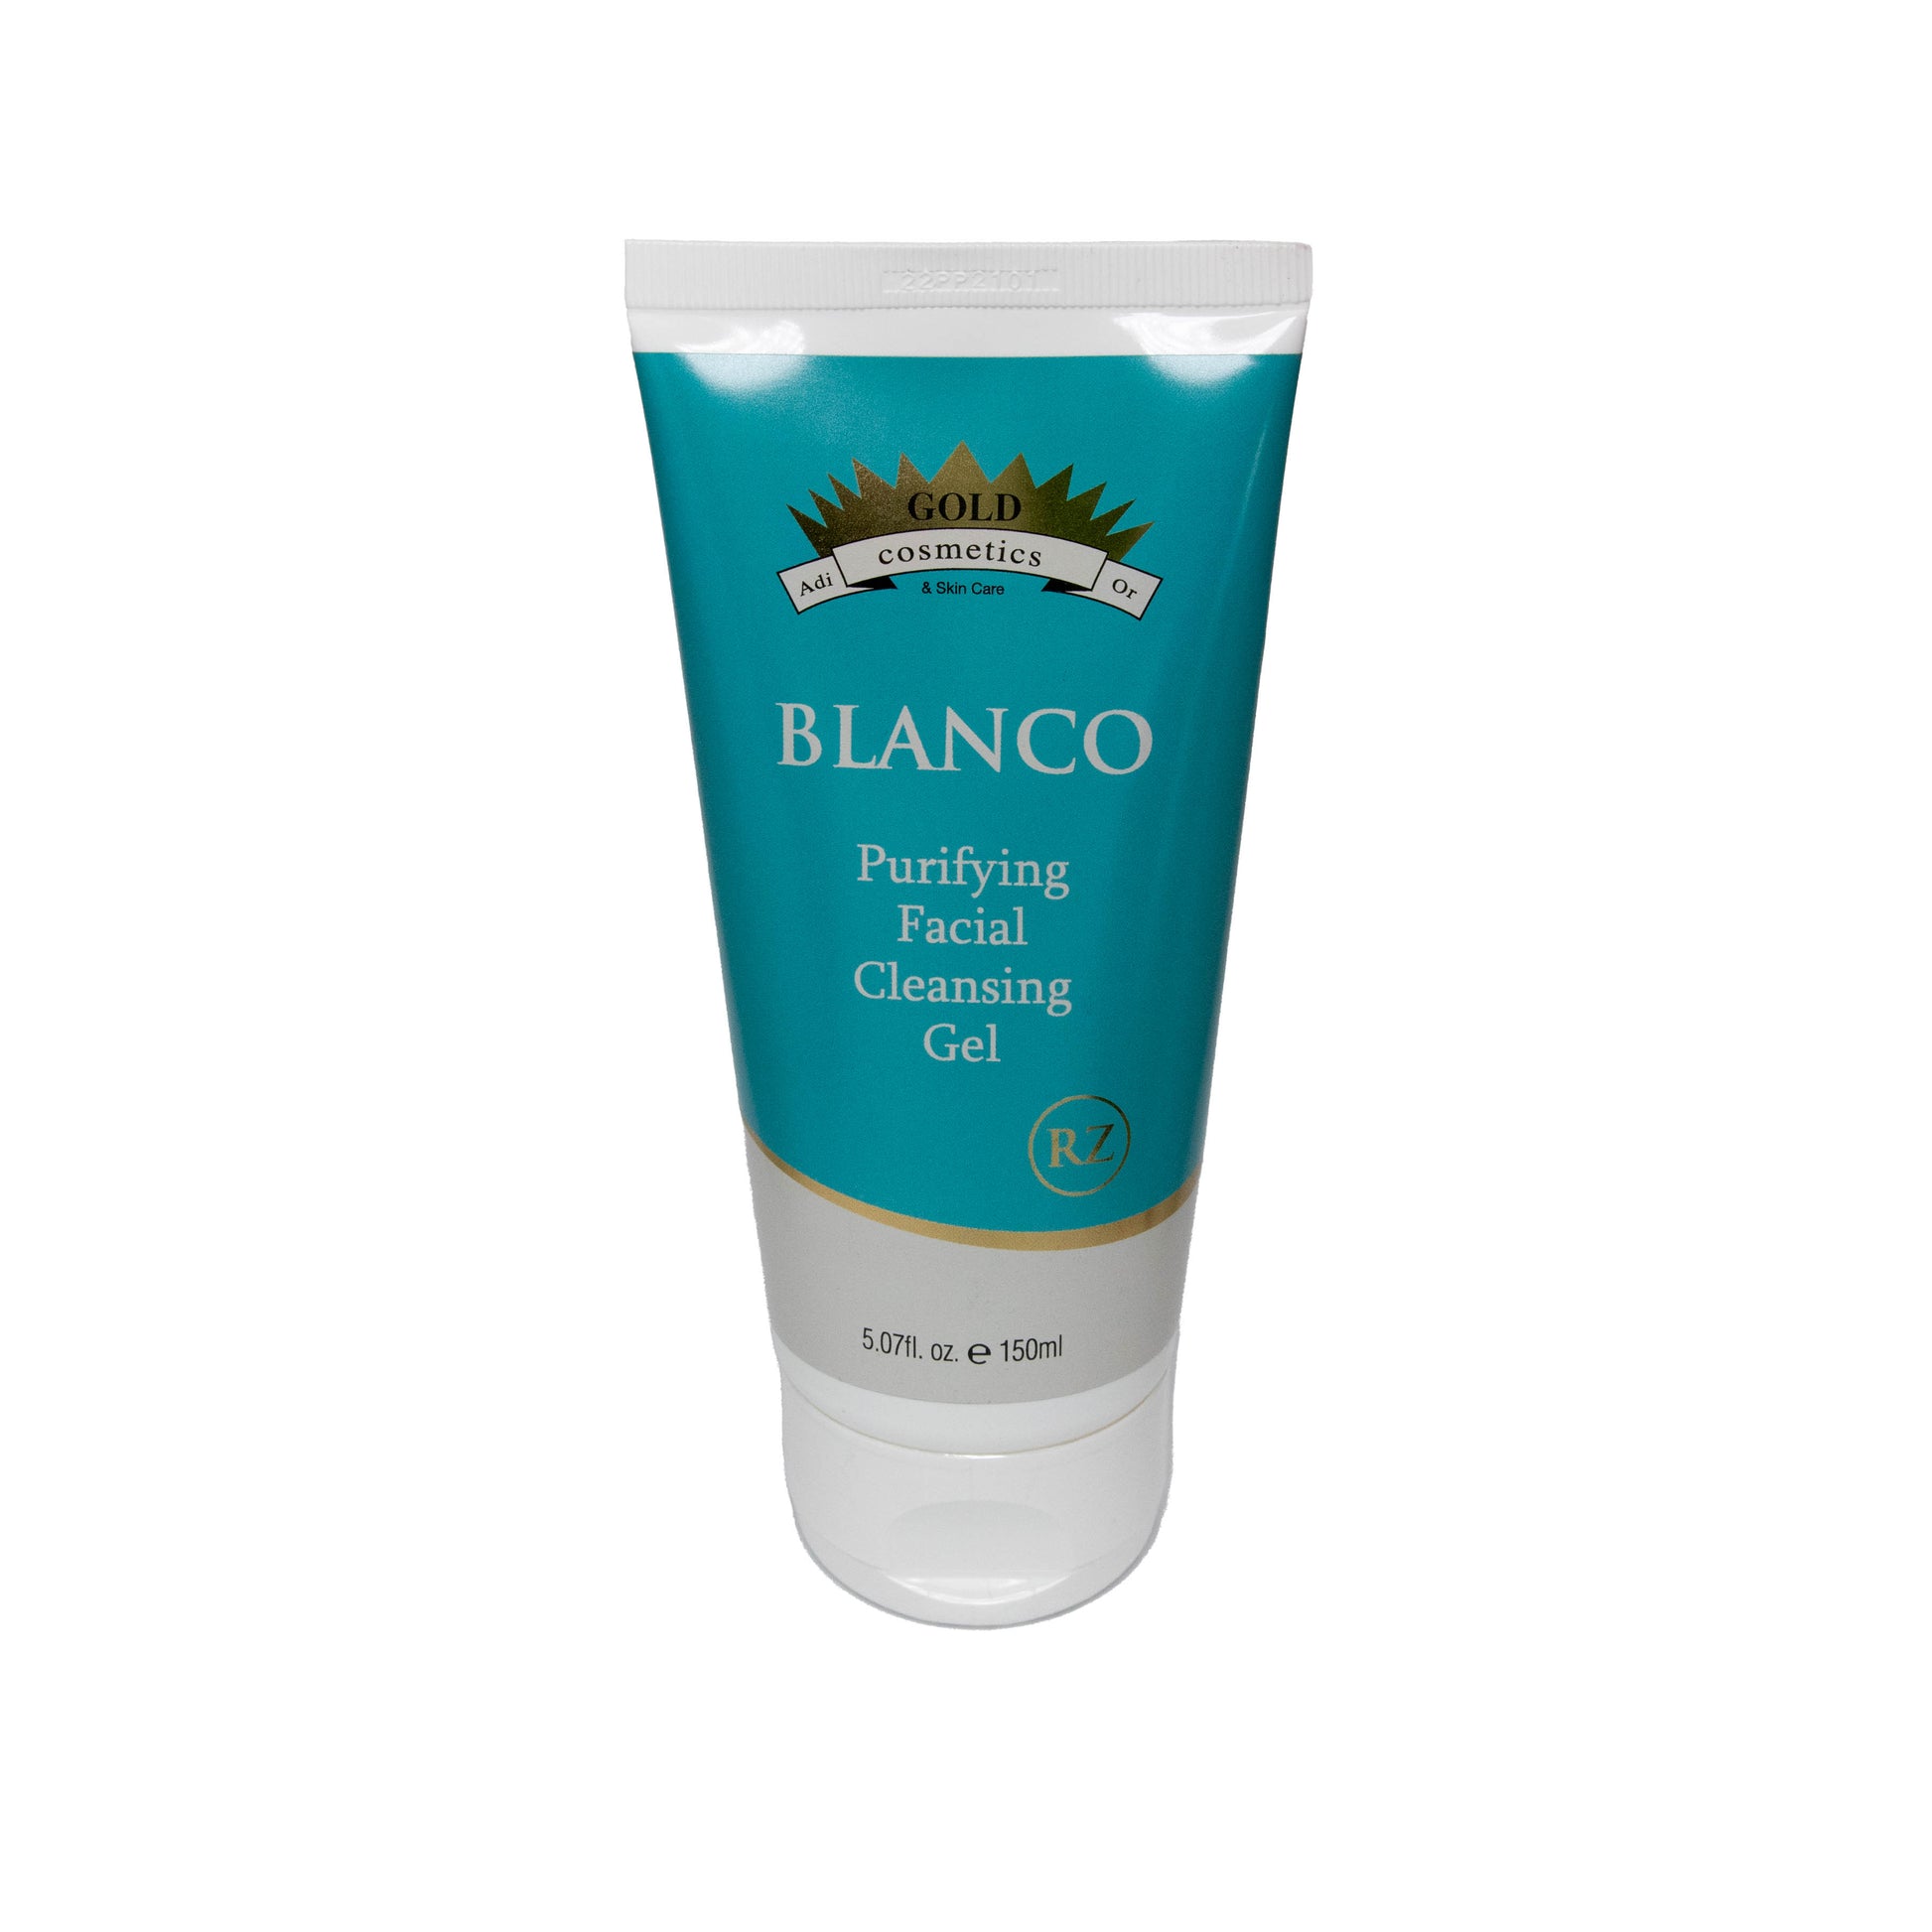 Gold Cosmetics | Blanco | Purifying Facial Cleansing Gel | 150 ml - Gold Cosmetics & Skin Care